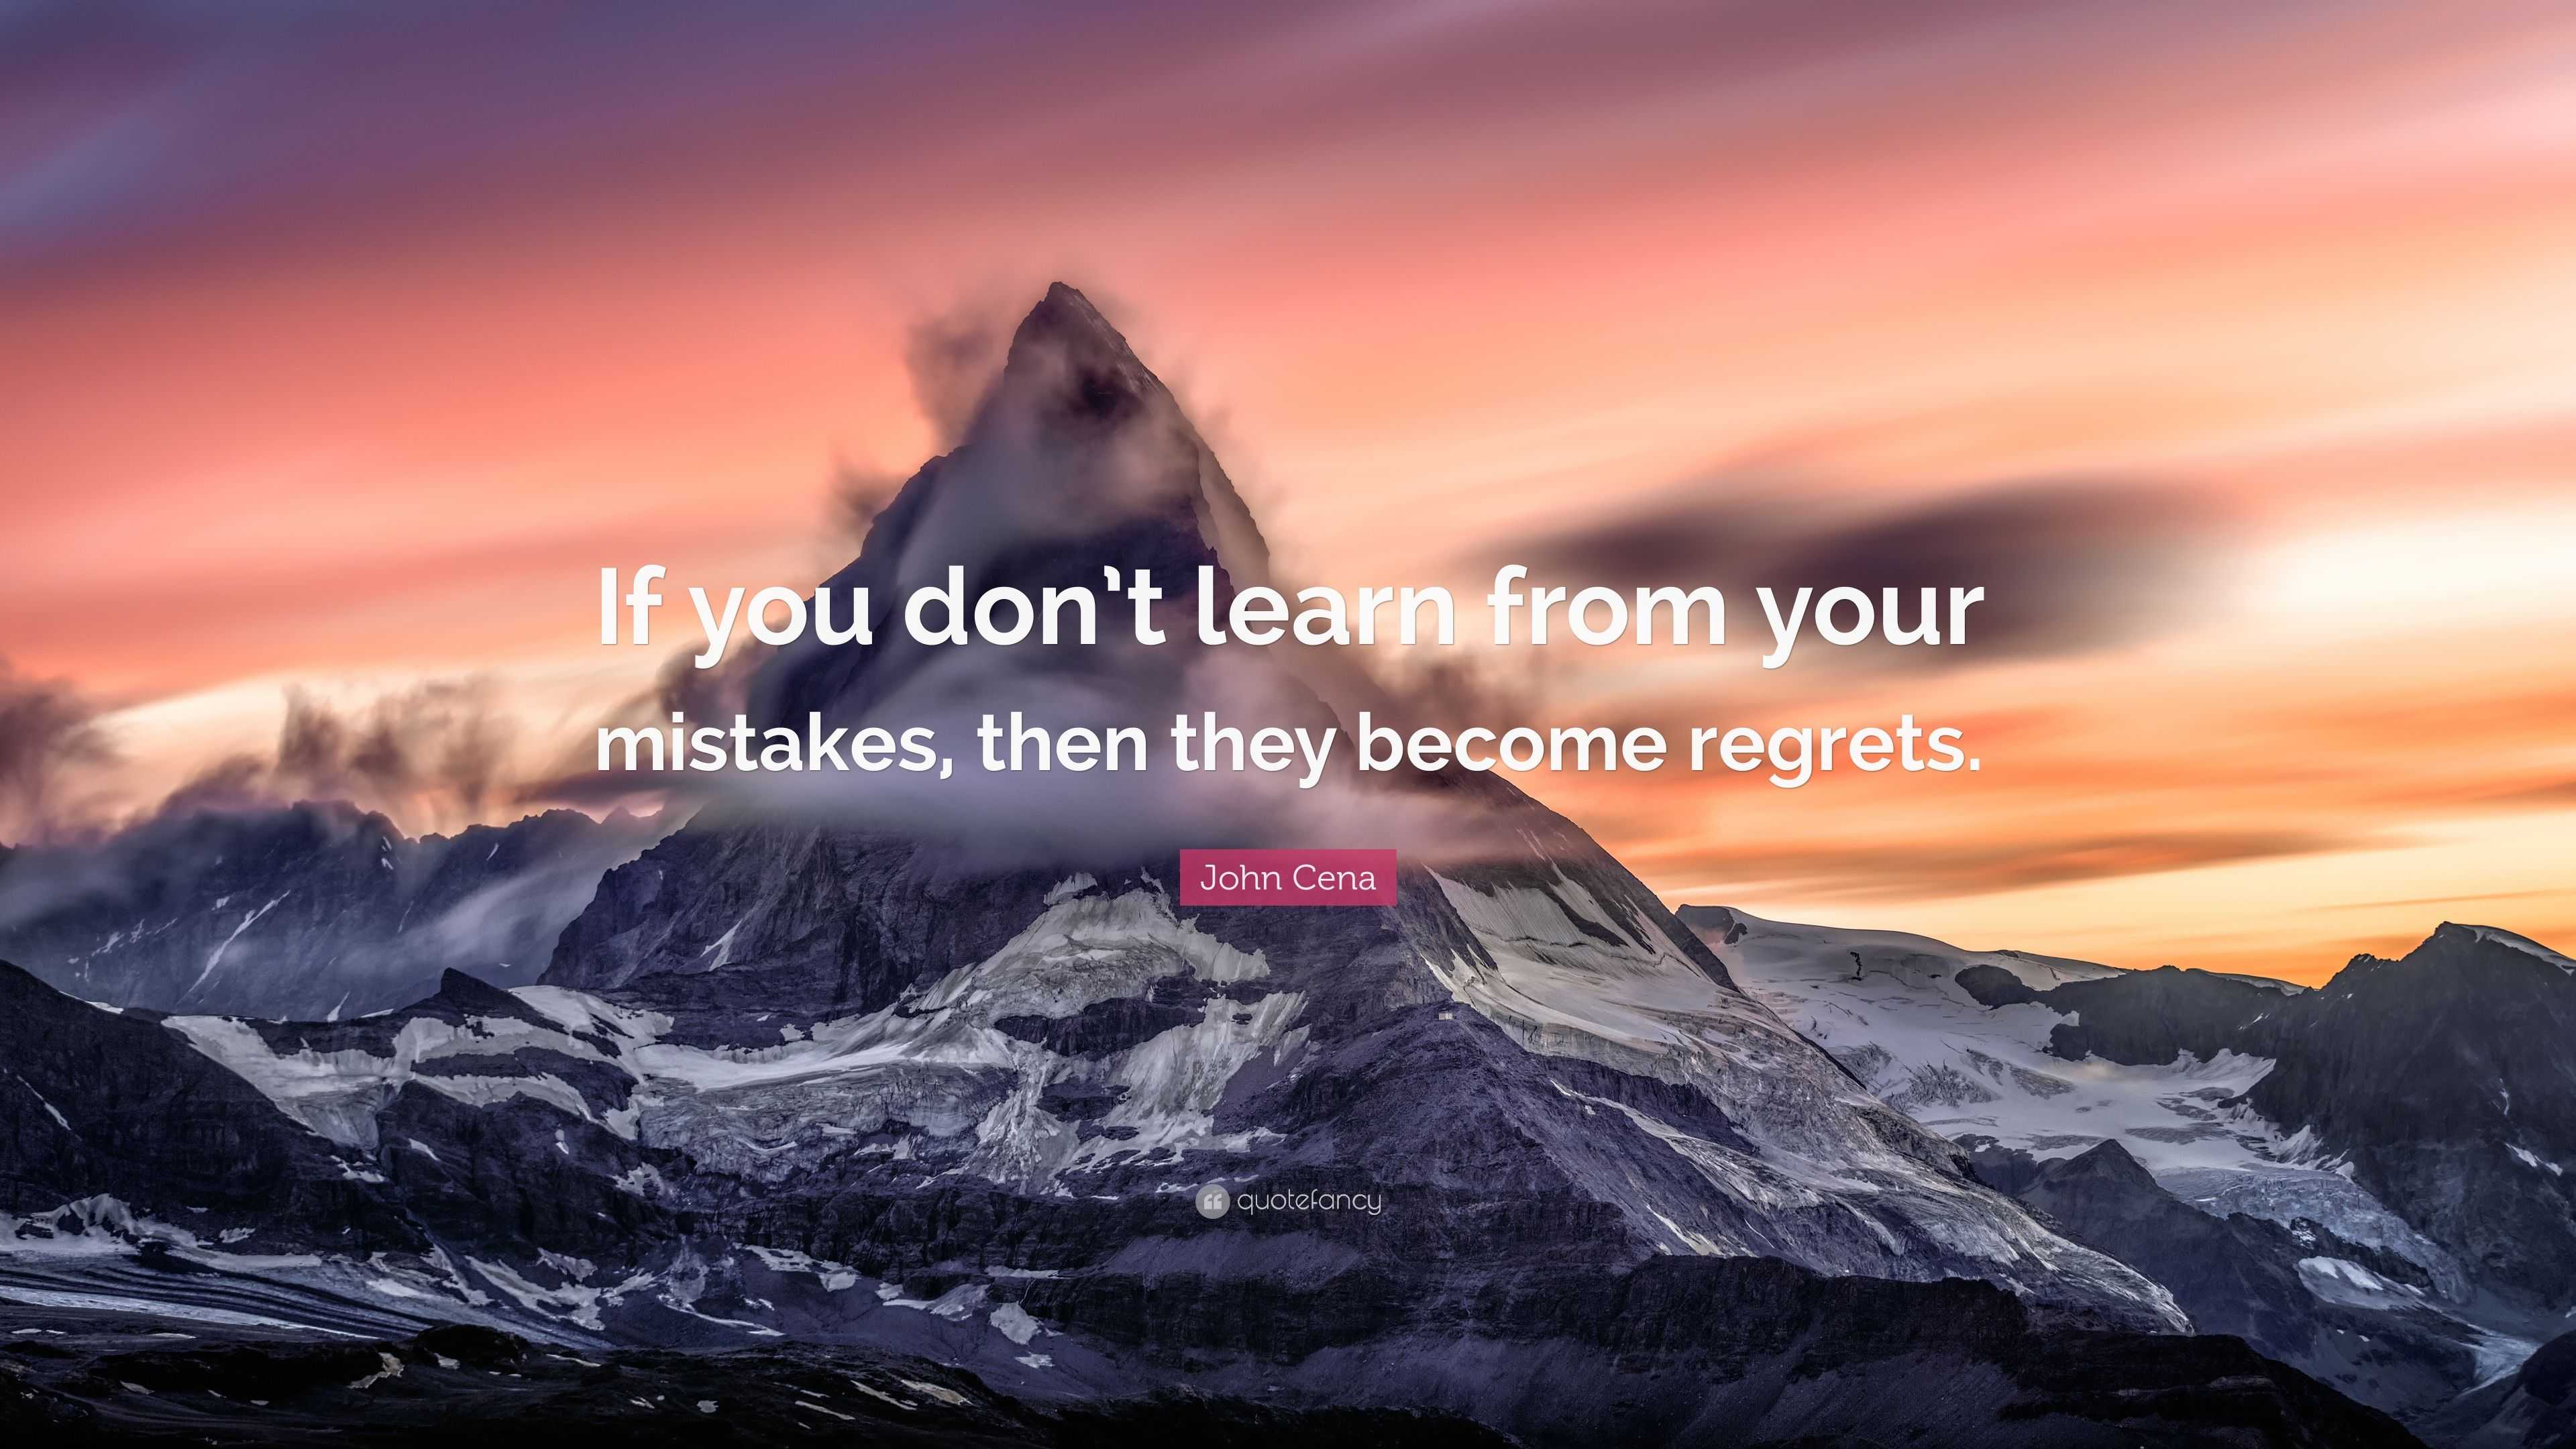 John Cena Quote: “If you don't learn from your mistakes, then they